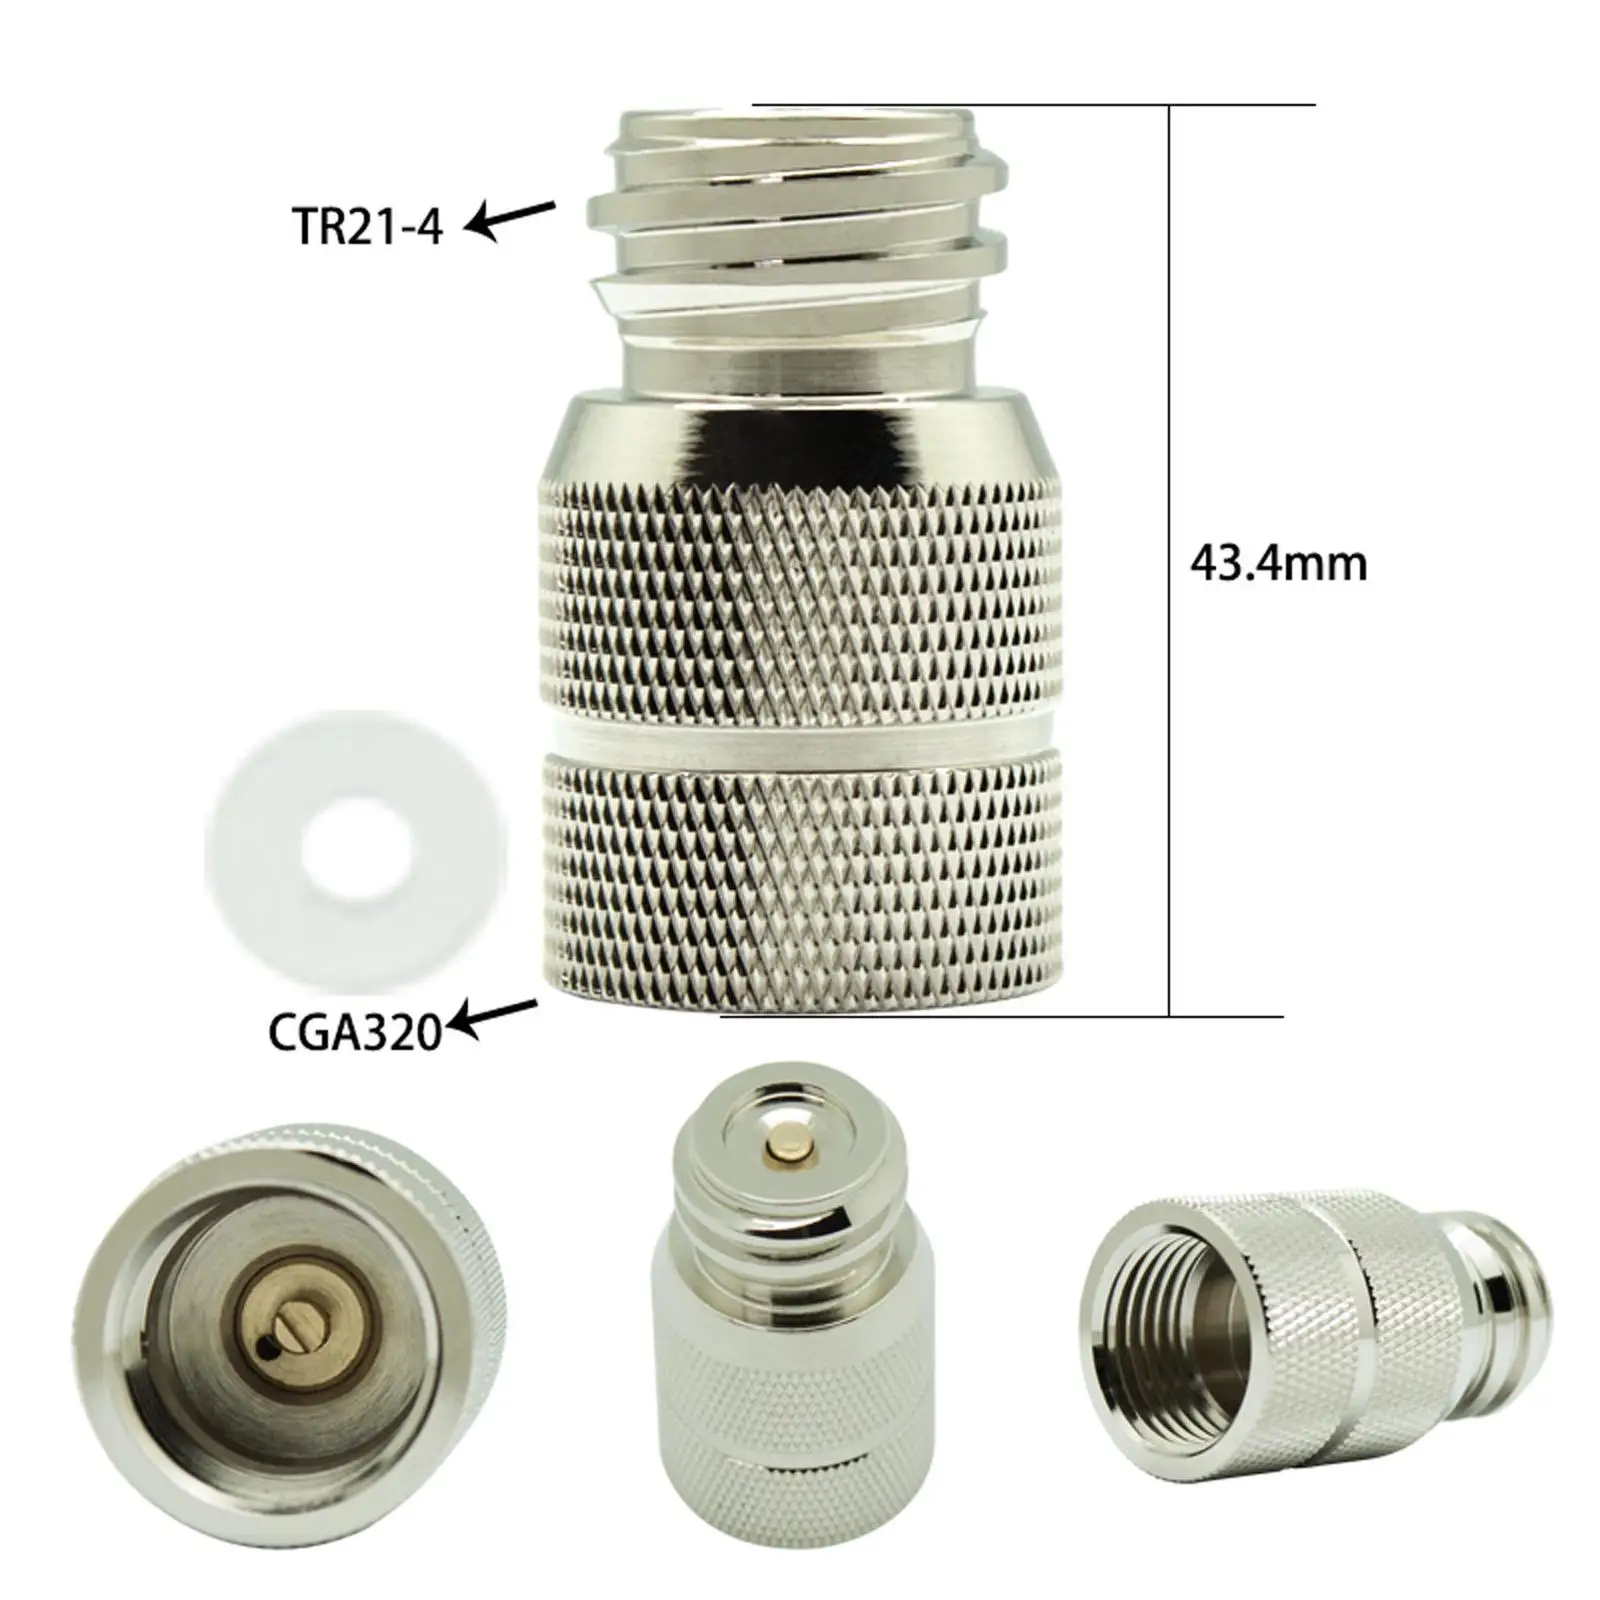 CO2 Cylinder Adapter to Cga320 Female Thread Replaces Brass Material Convenient Installation